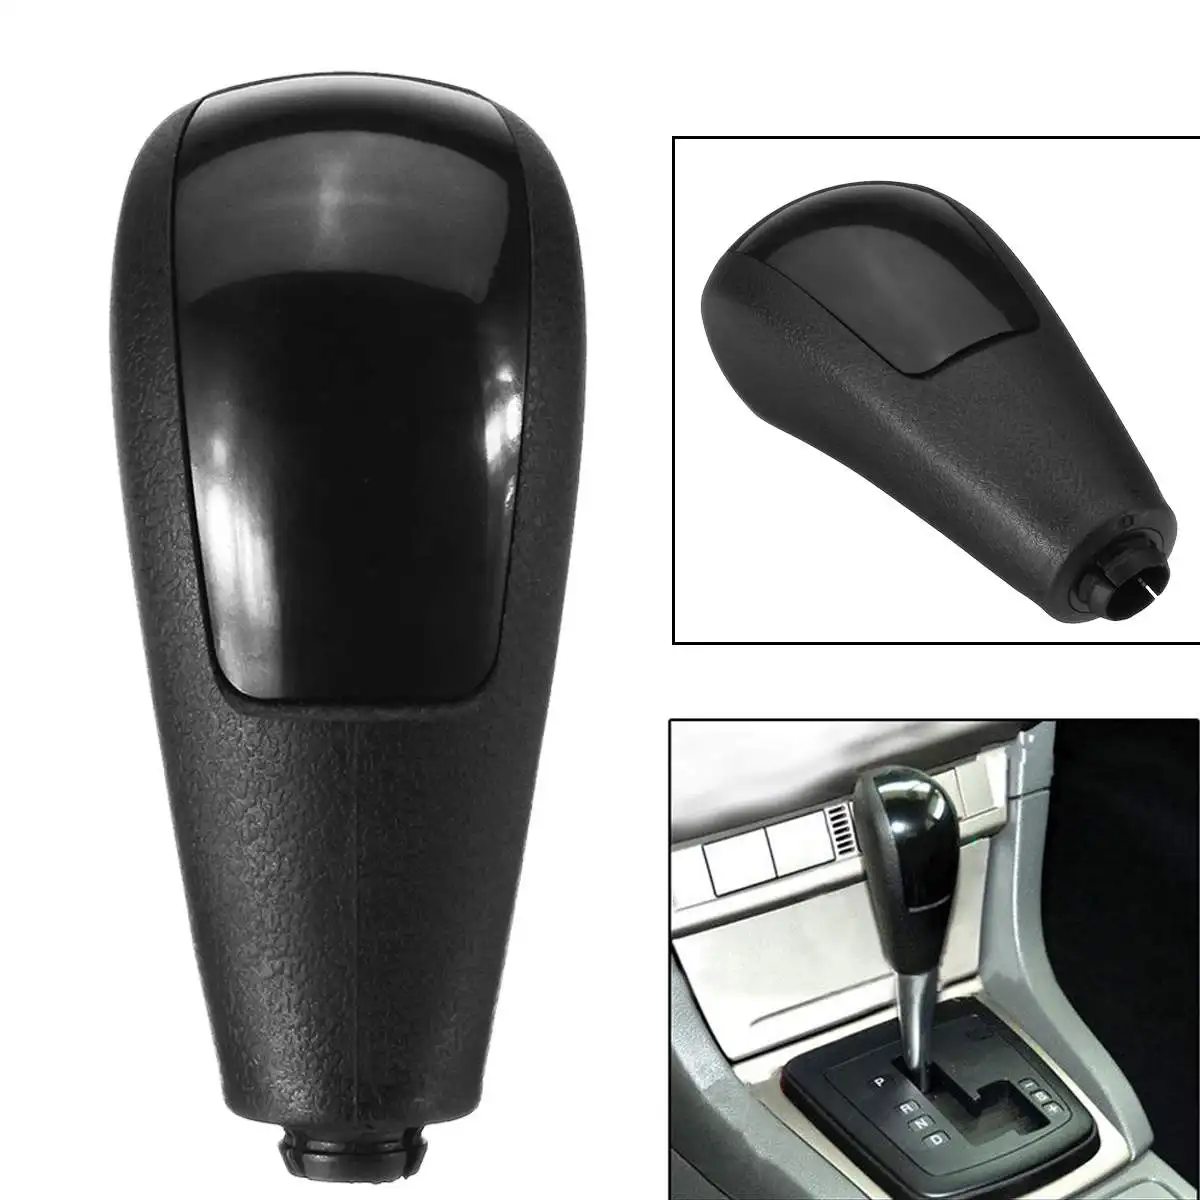 High quality Leather 6 Speed Gear Shift Knob Stick Black Gear Shift Knob for Ford for Focus MK2 for Fiesta 2005-2012 Automatic